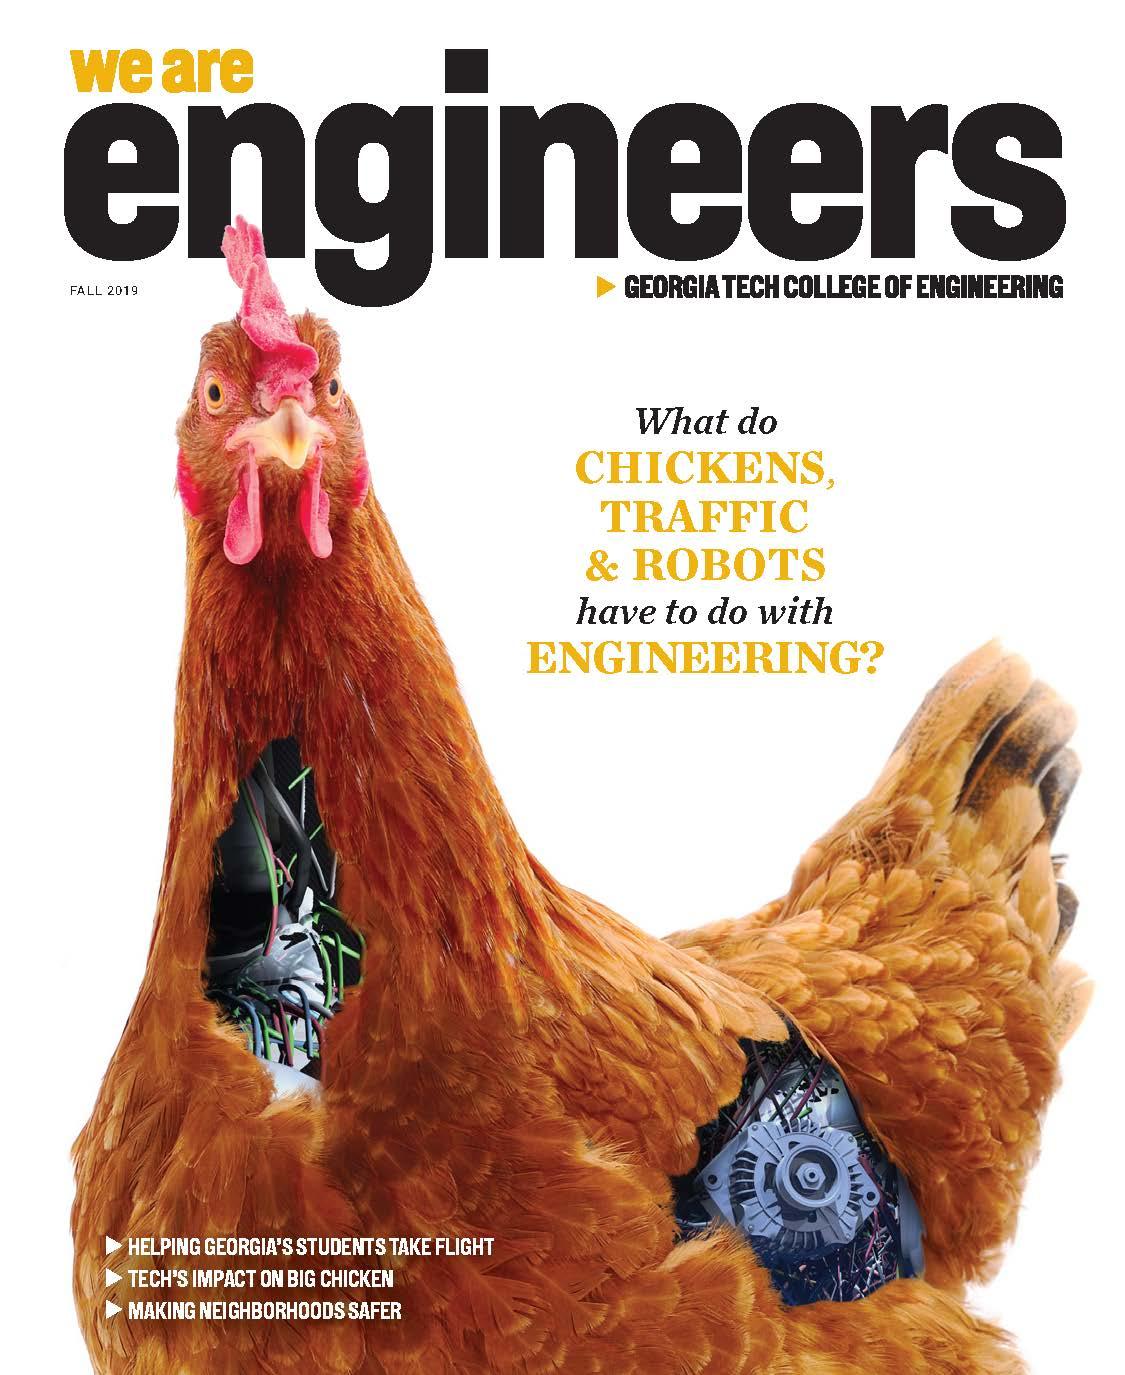 "We Are Engineers" magazine cover with the headline "What do Chickens, Traffic, and Robots have to do with Engineering?" and a concept image of a chicken with robotic parts